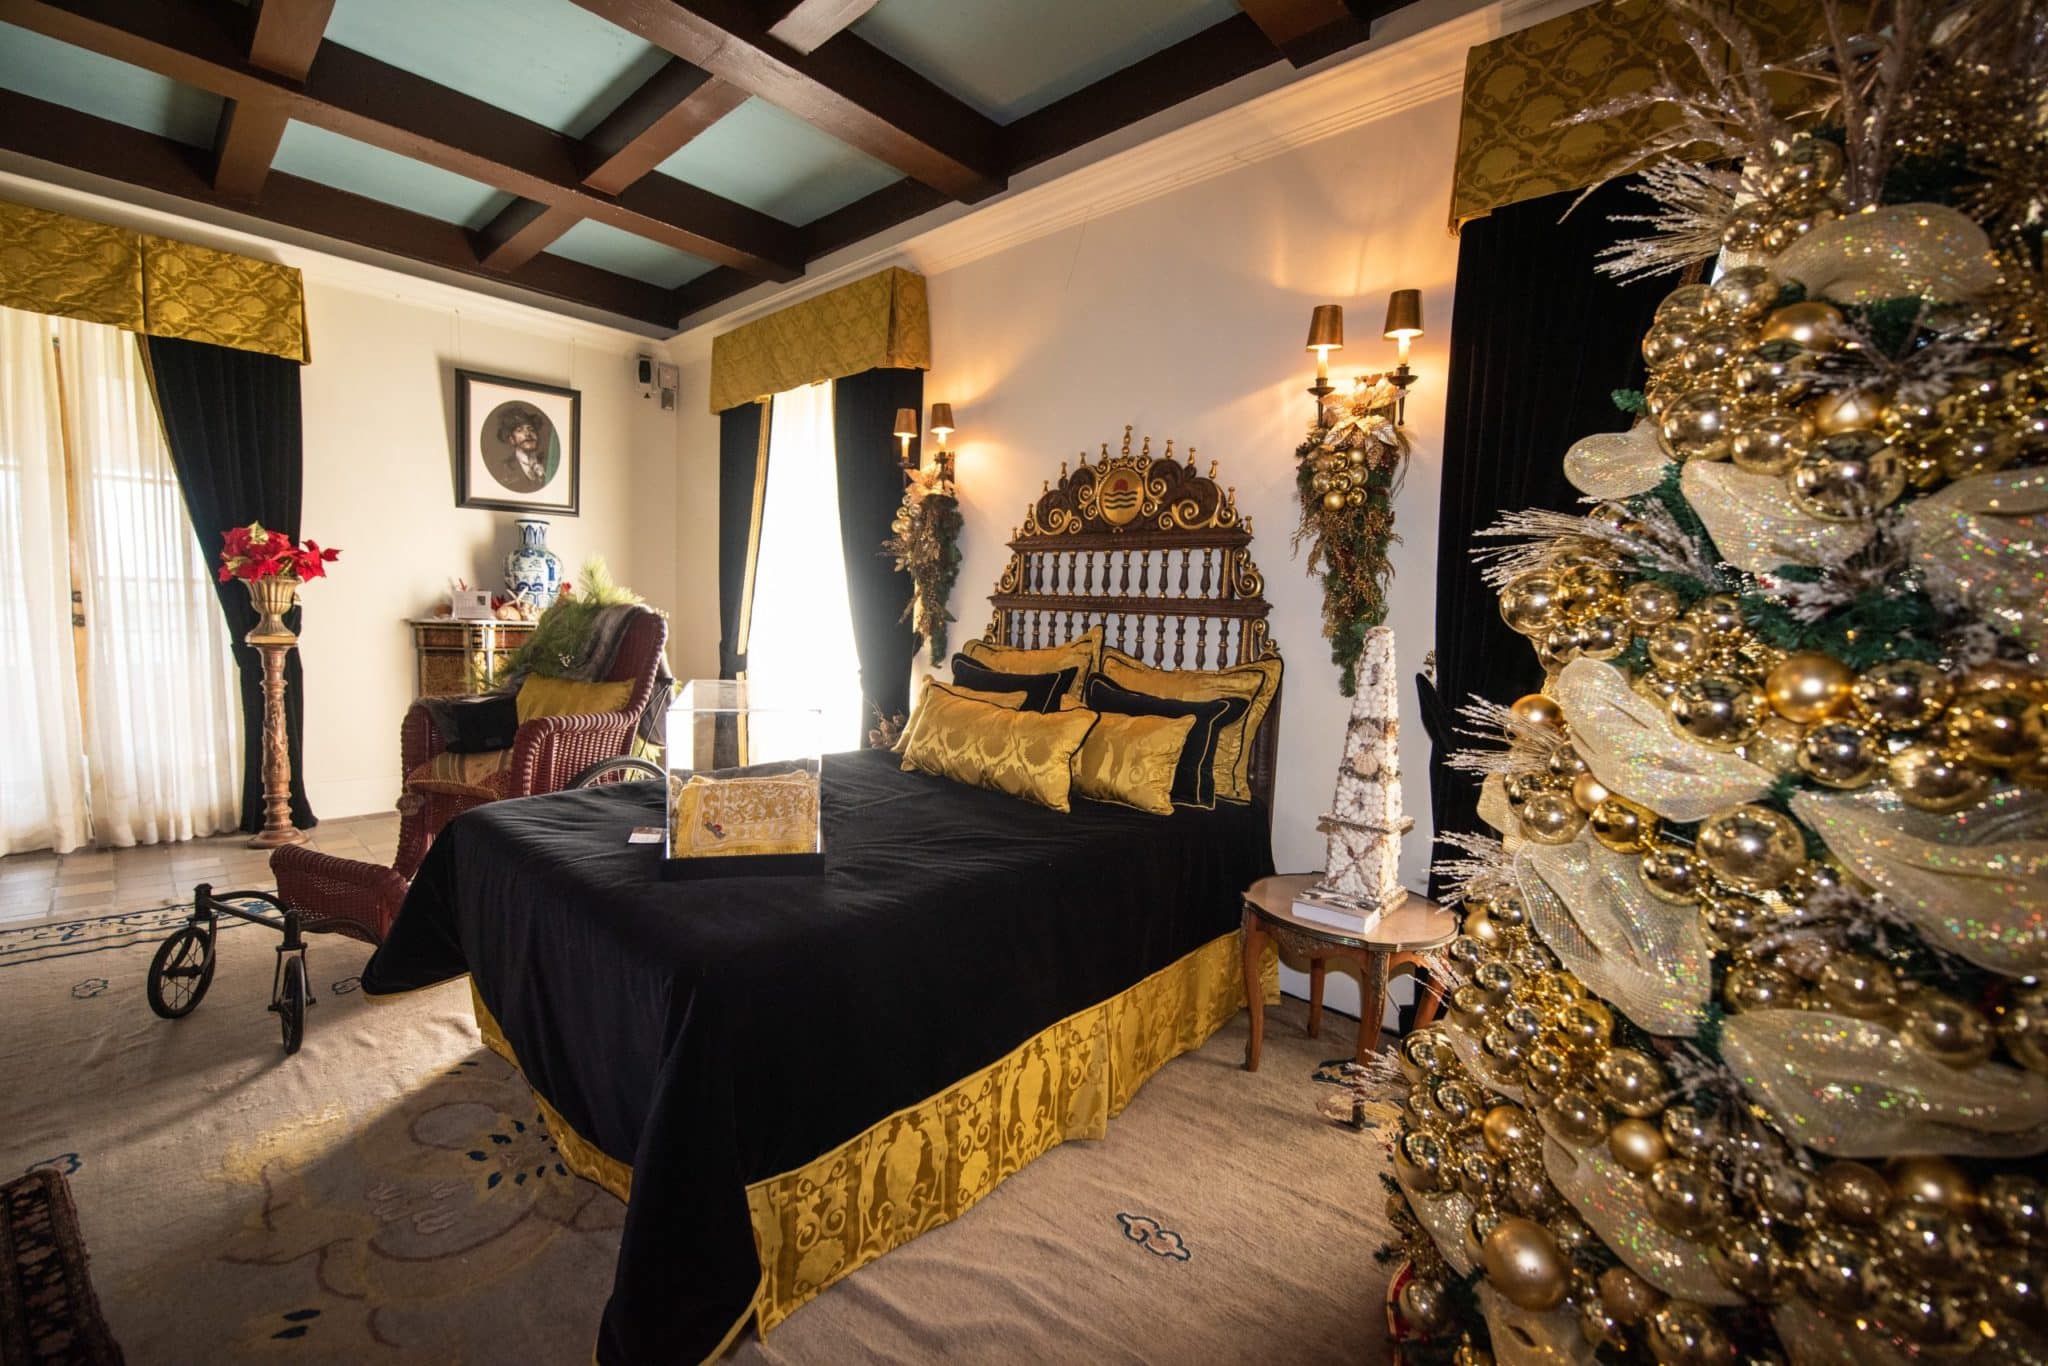 Historic Holiday Decor at the Deering Estate